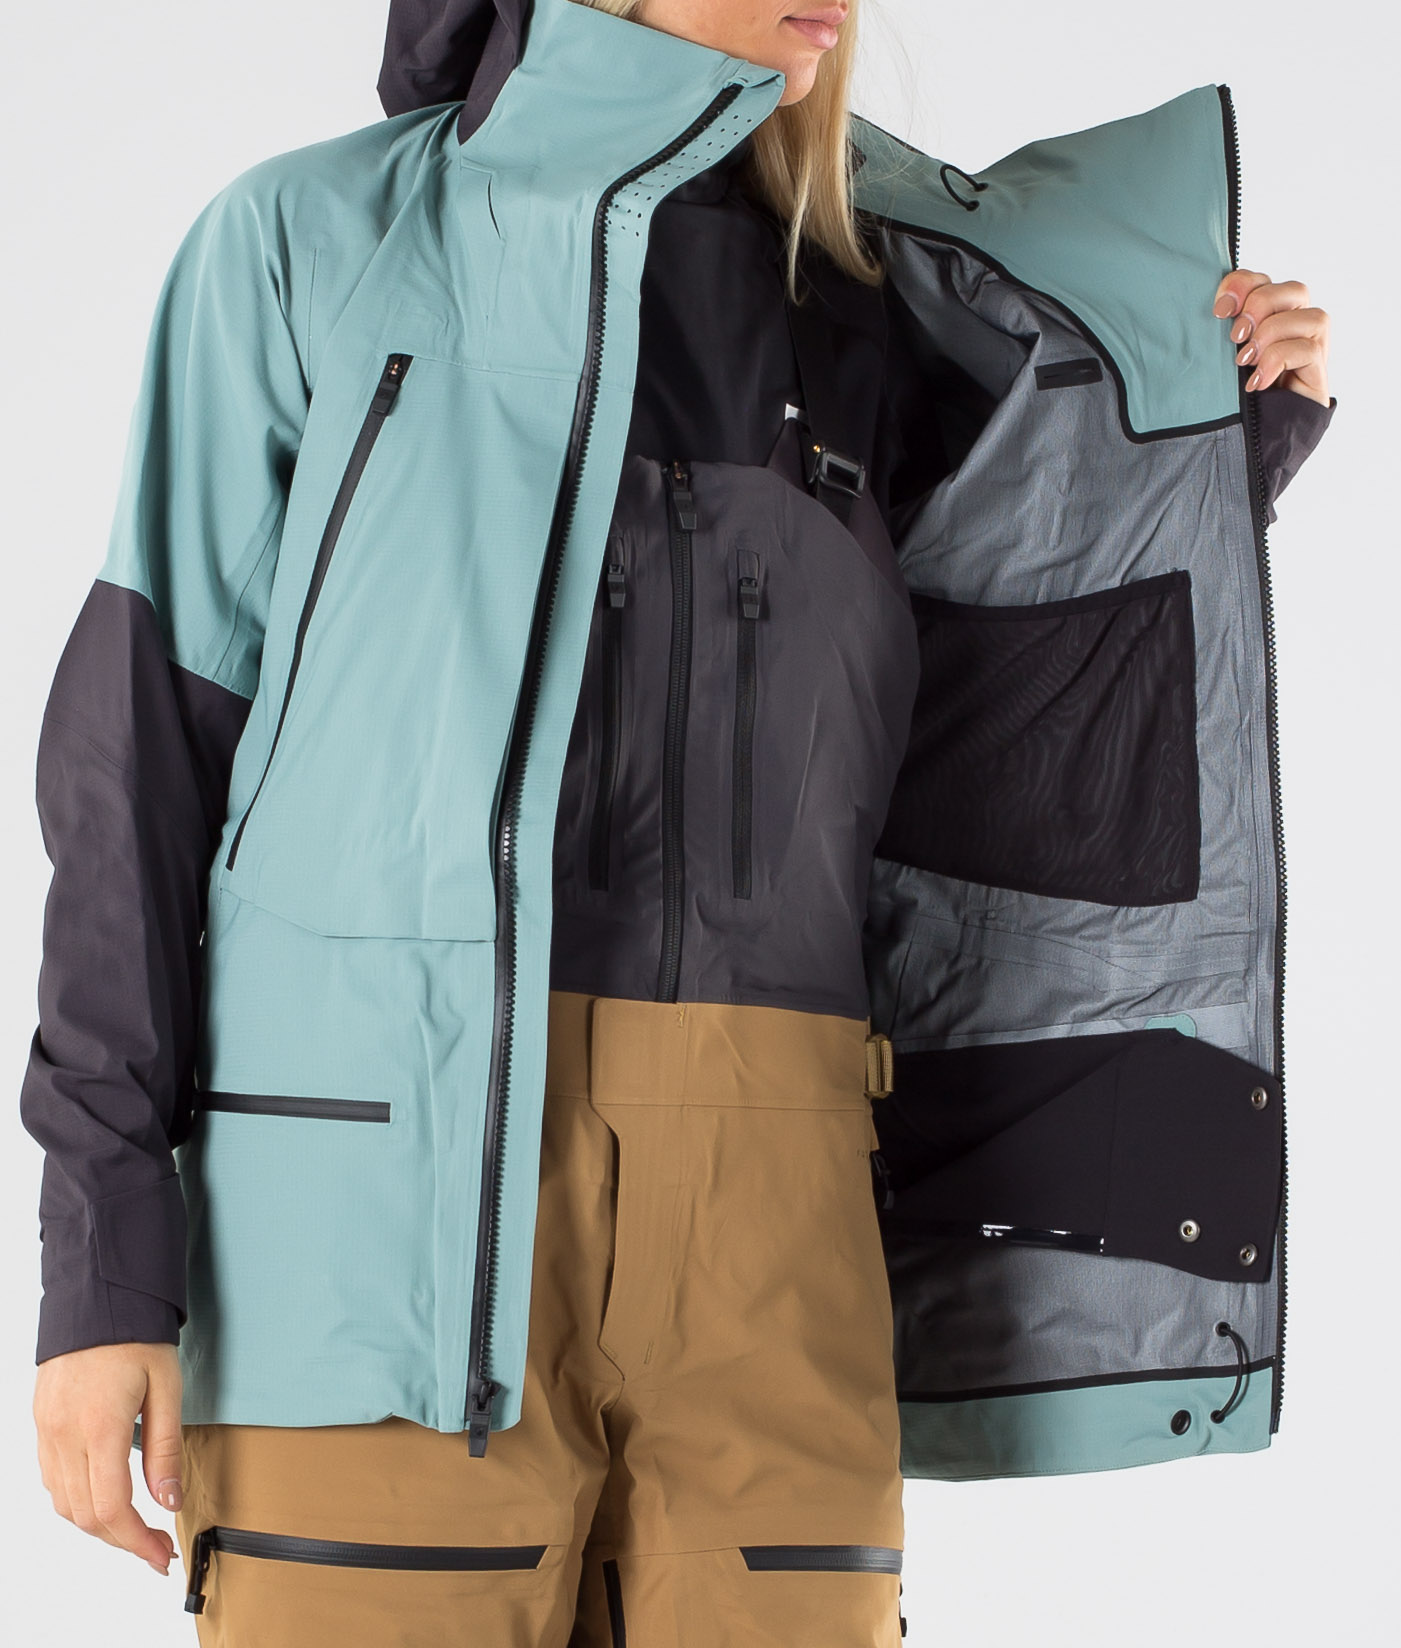 north face purist triclimate jacket